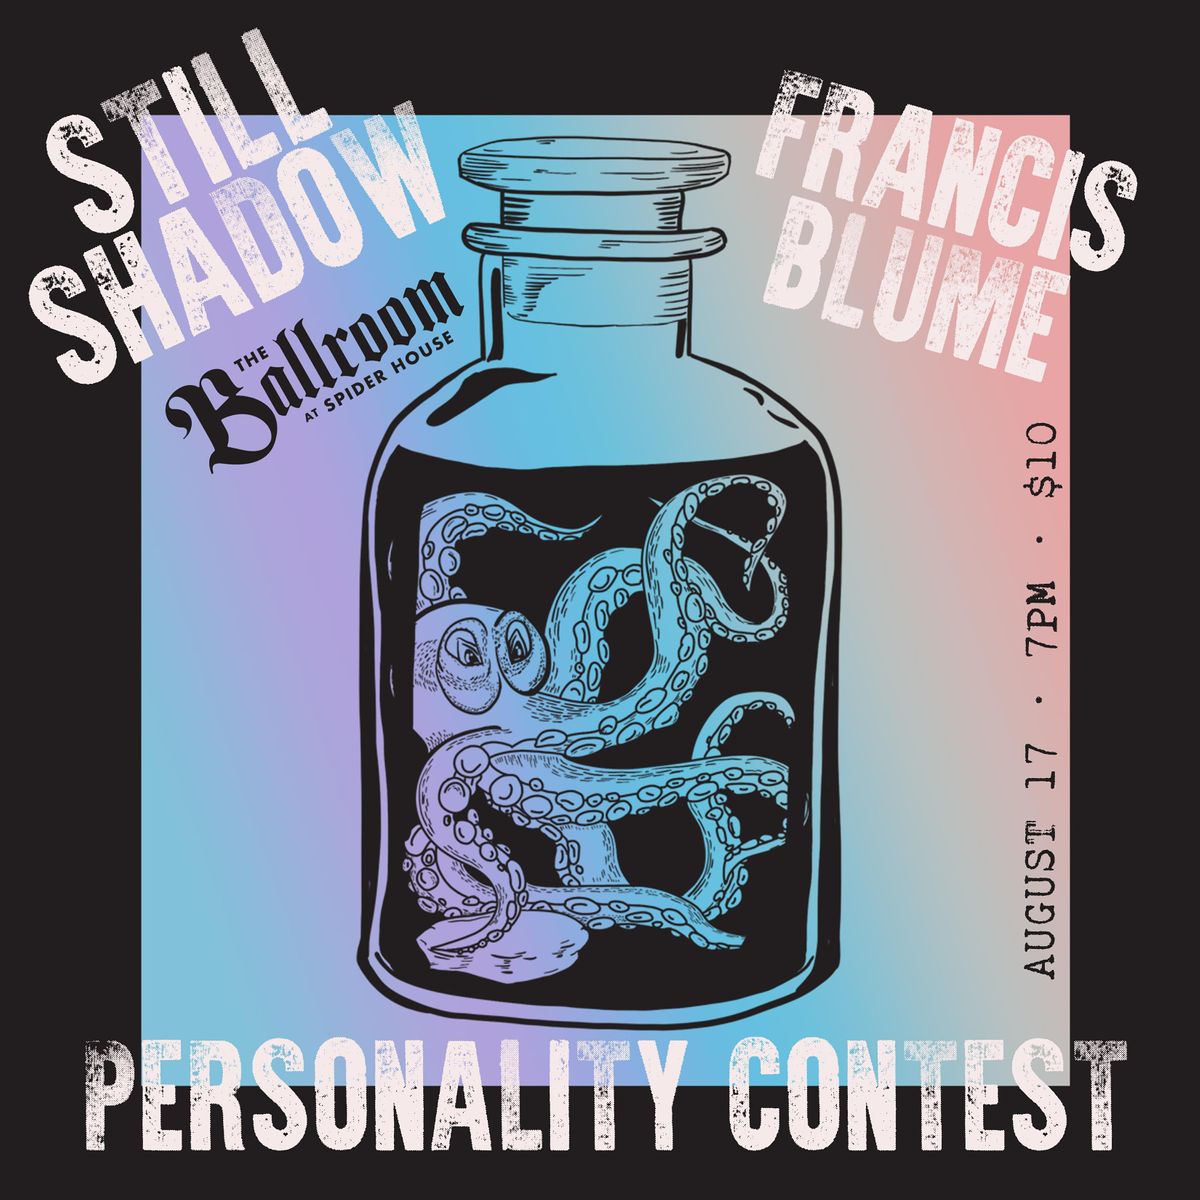 Still Shadow, Personality Contest, Francis Blume